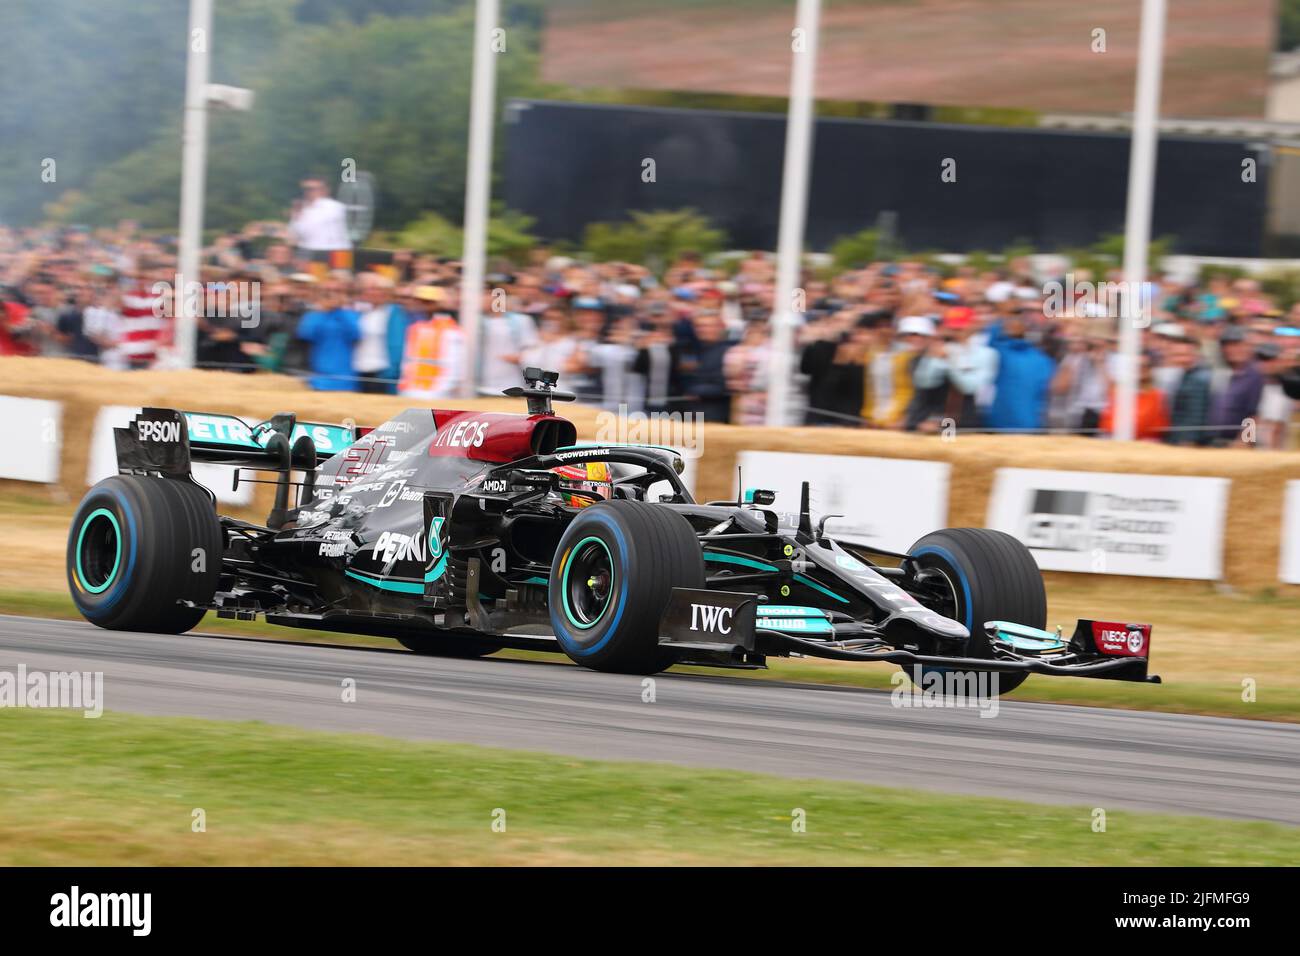 Mercedes F1 racing car at the Festival of Speed 2022 at Goodwood, Sussex, UK Stock Photo